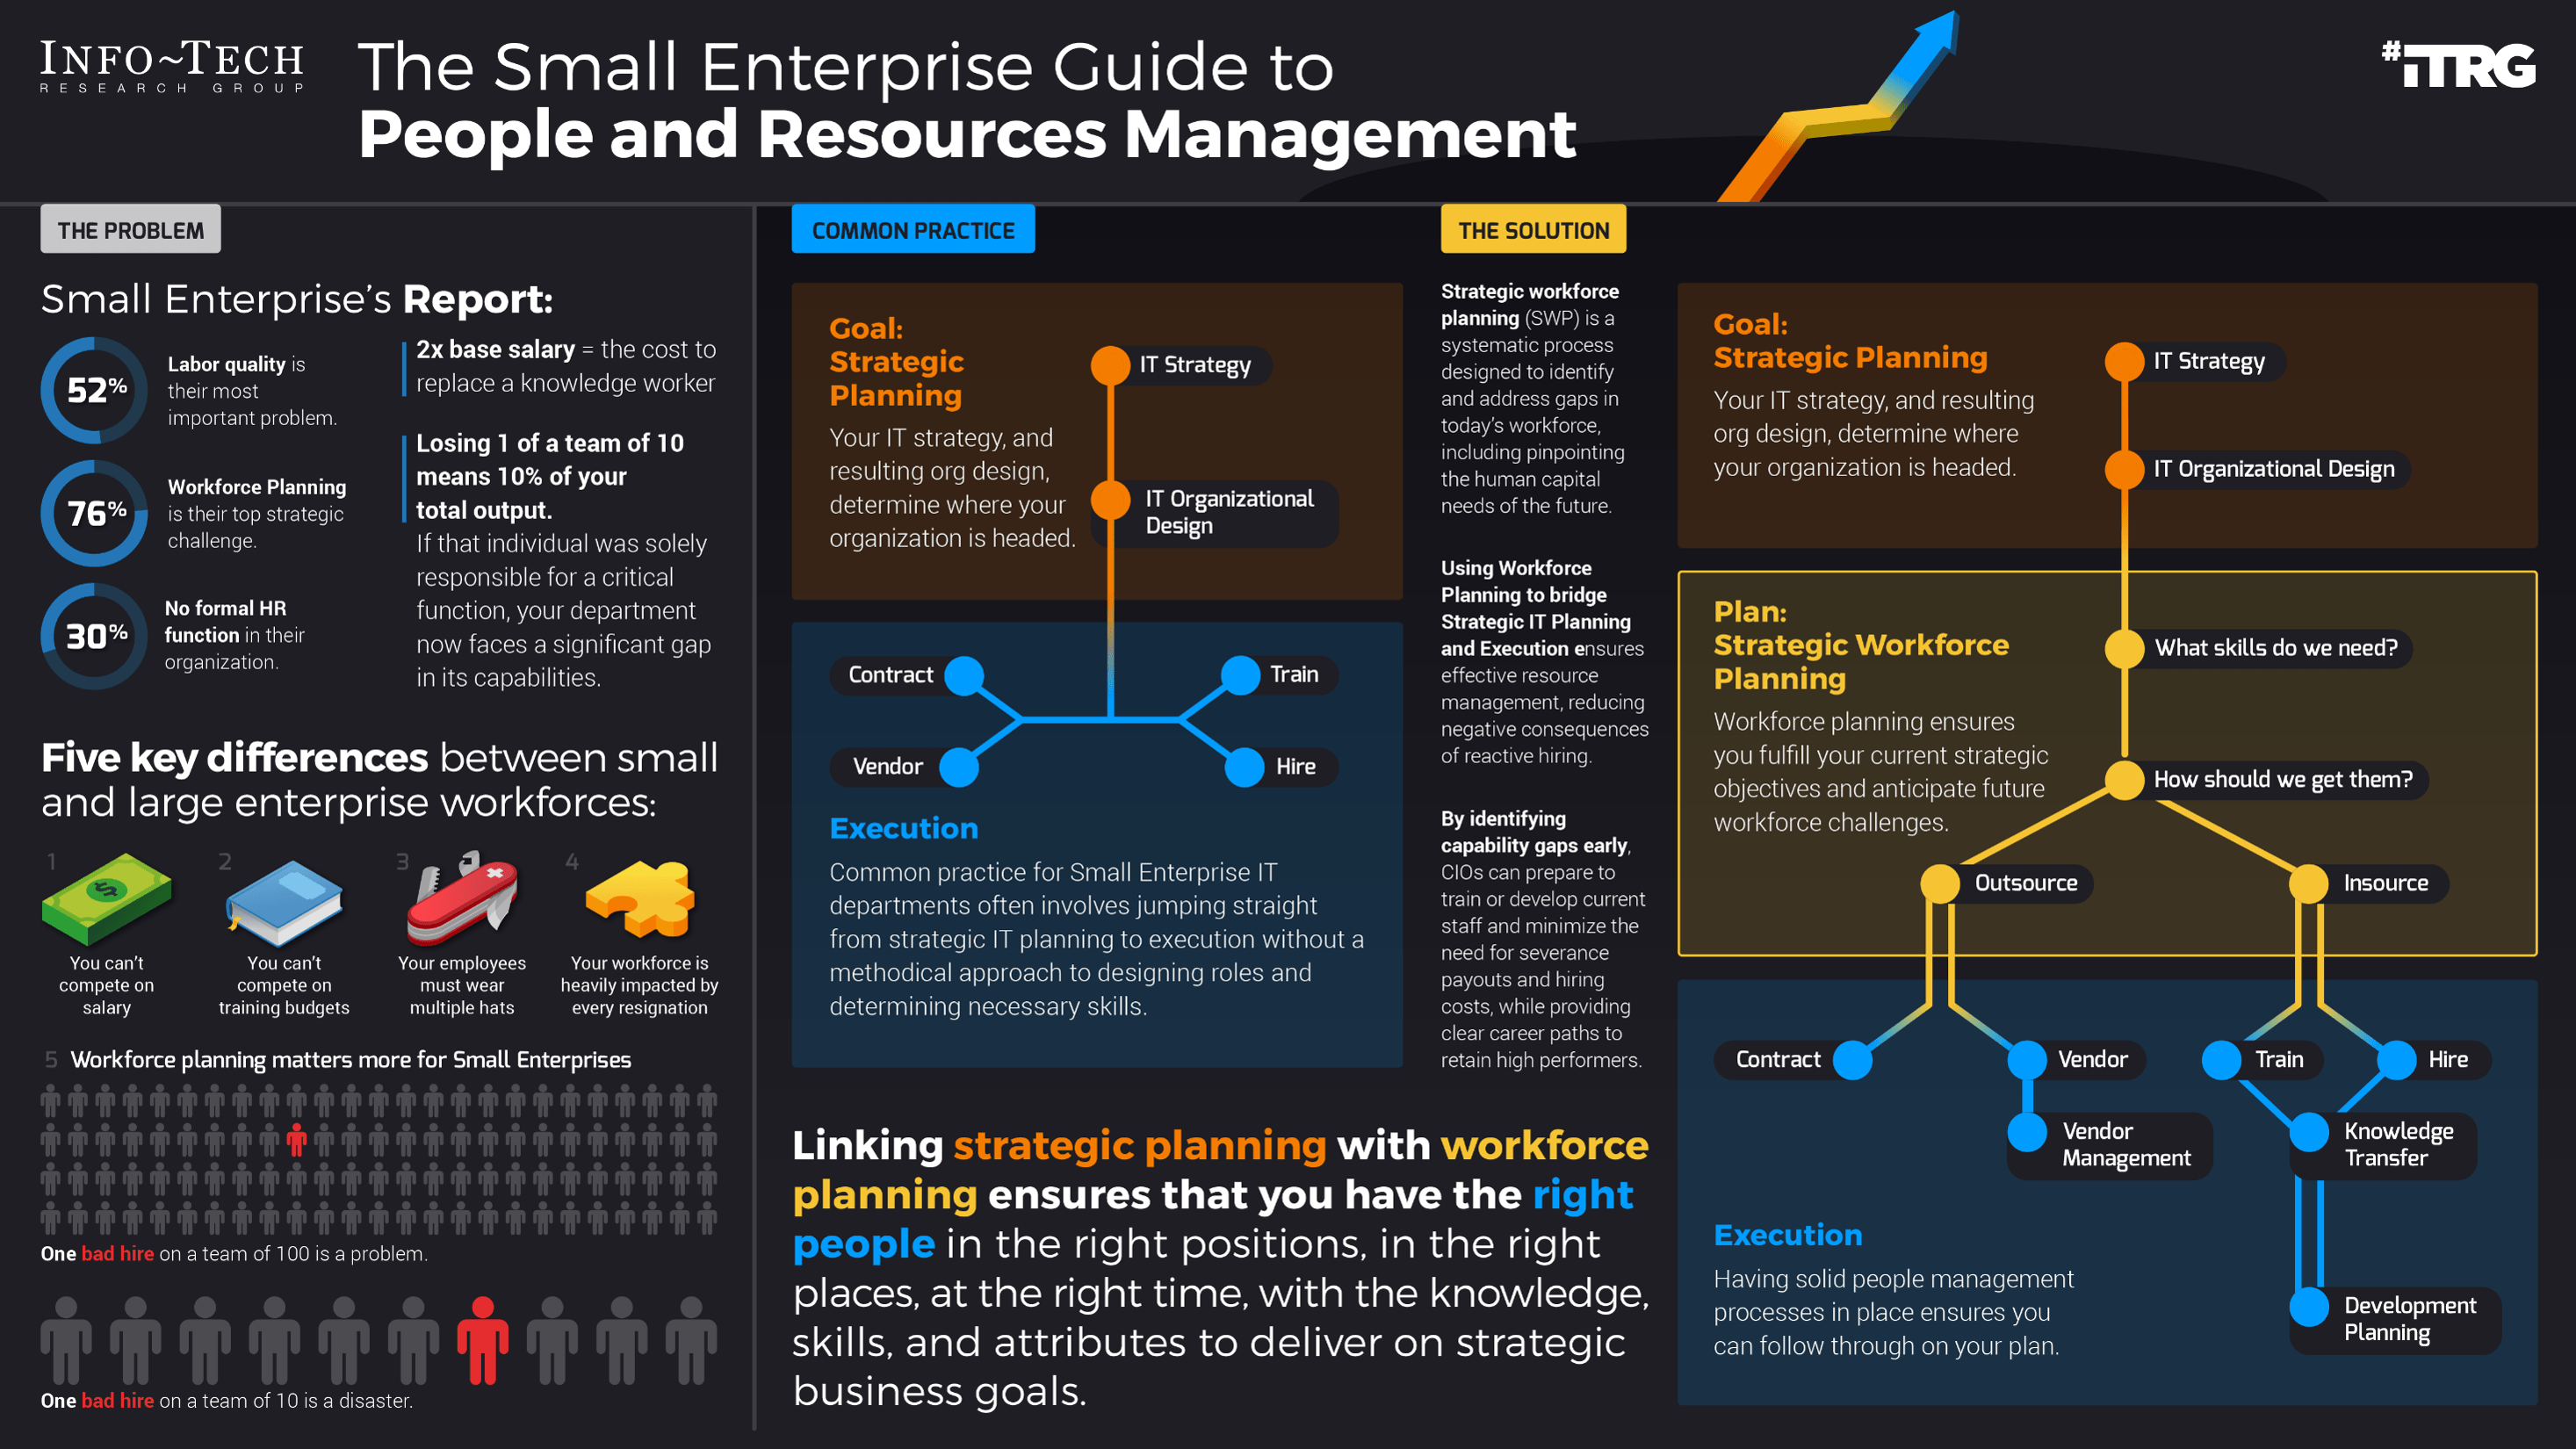 This is an image of Info-Tech's small enterprise guide o people and resource management.